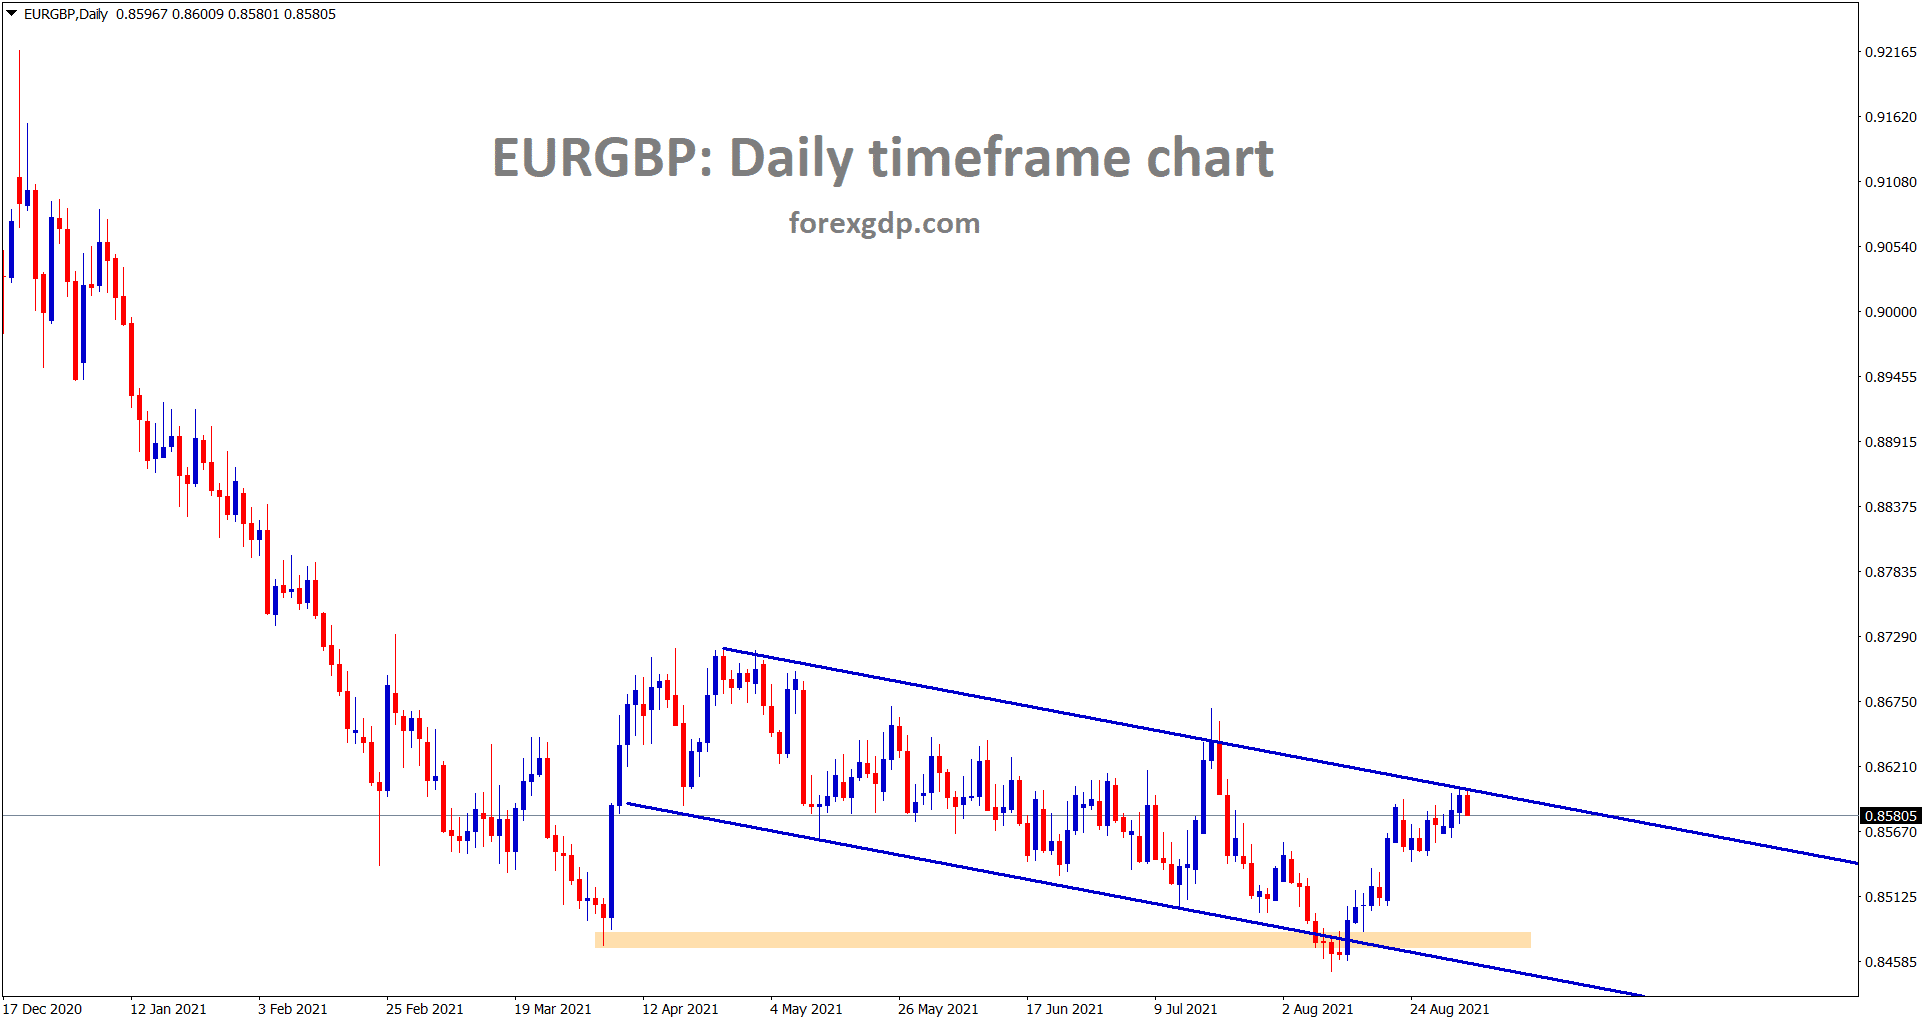 EURGBP reached the lower high of the major descending channel